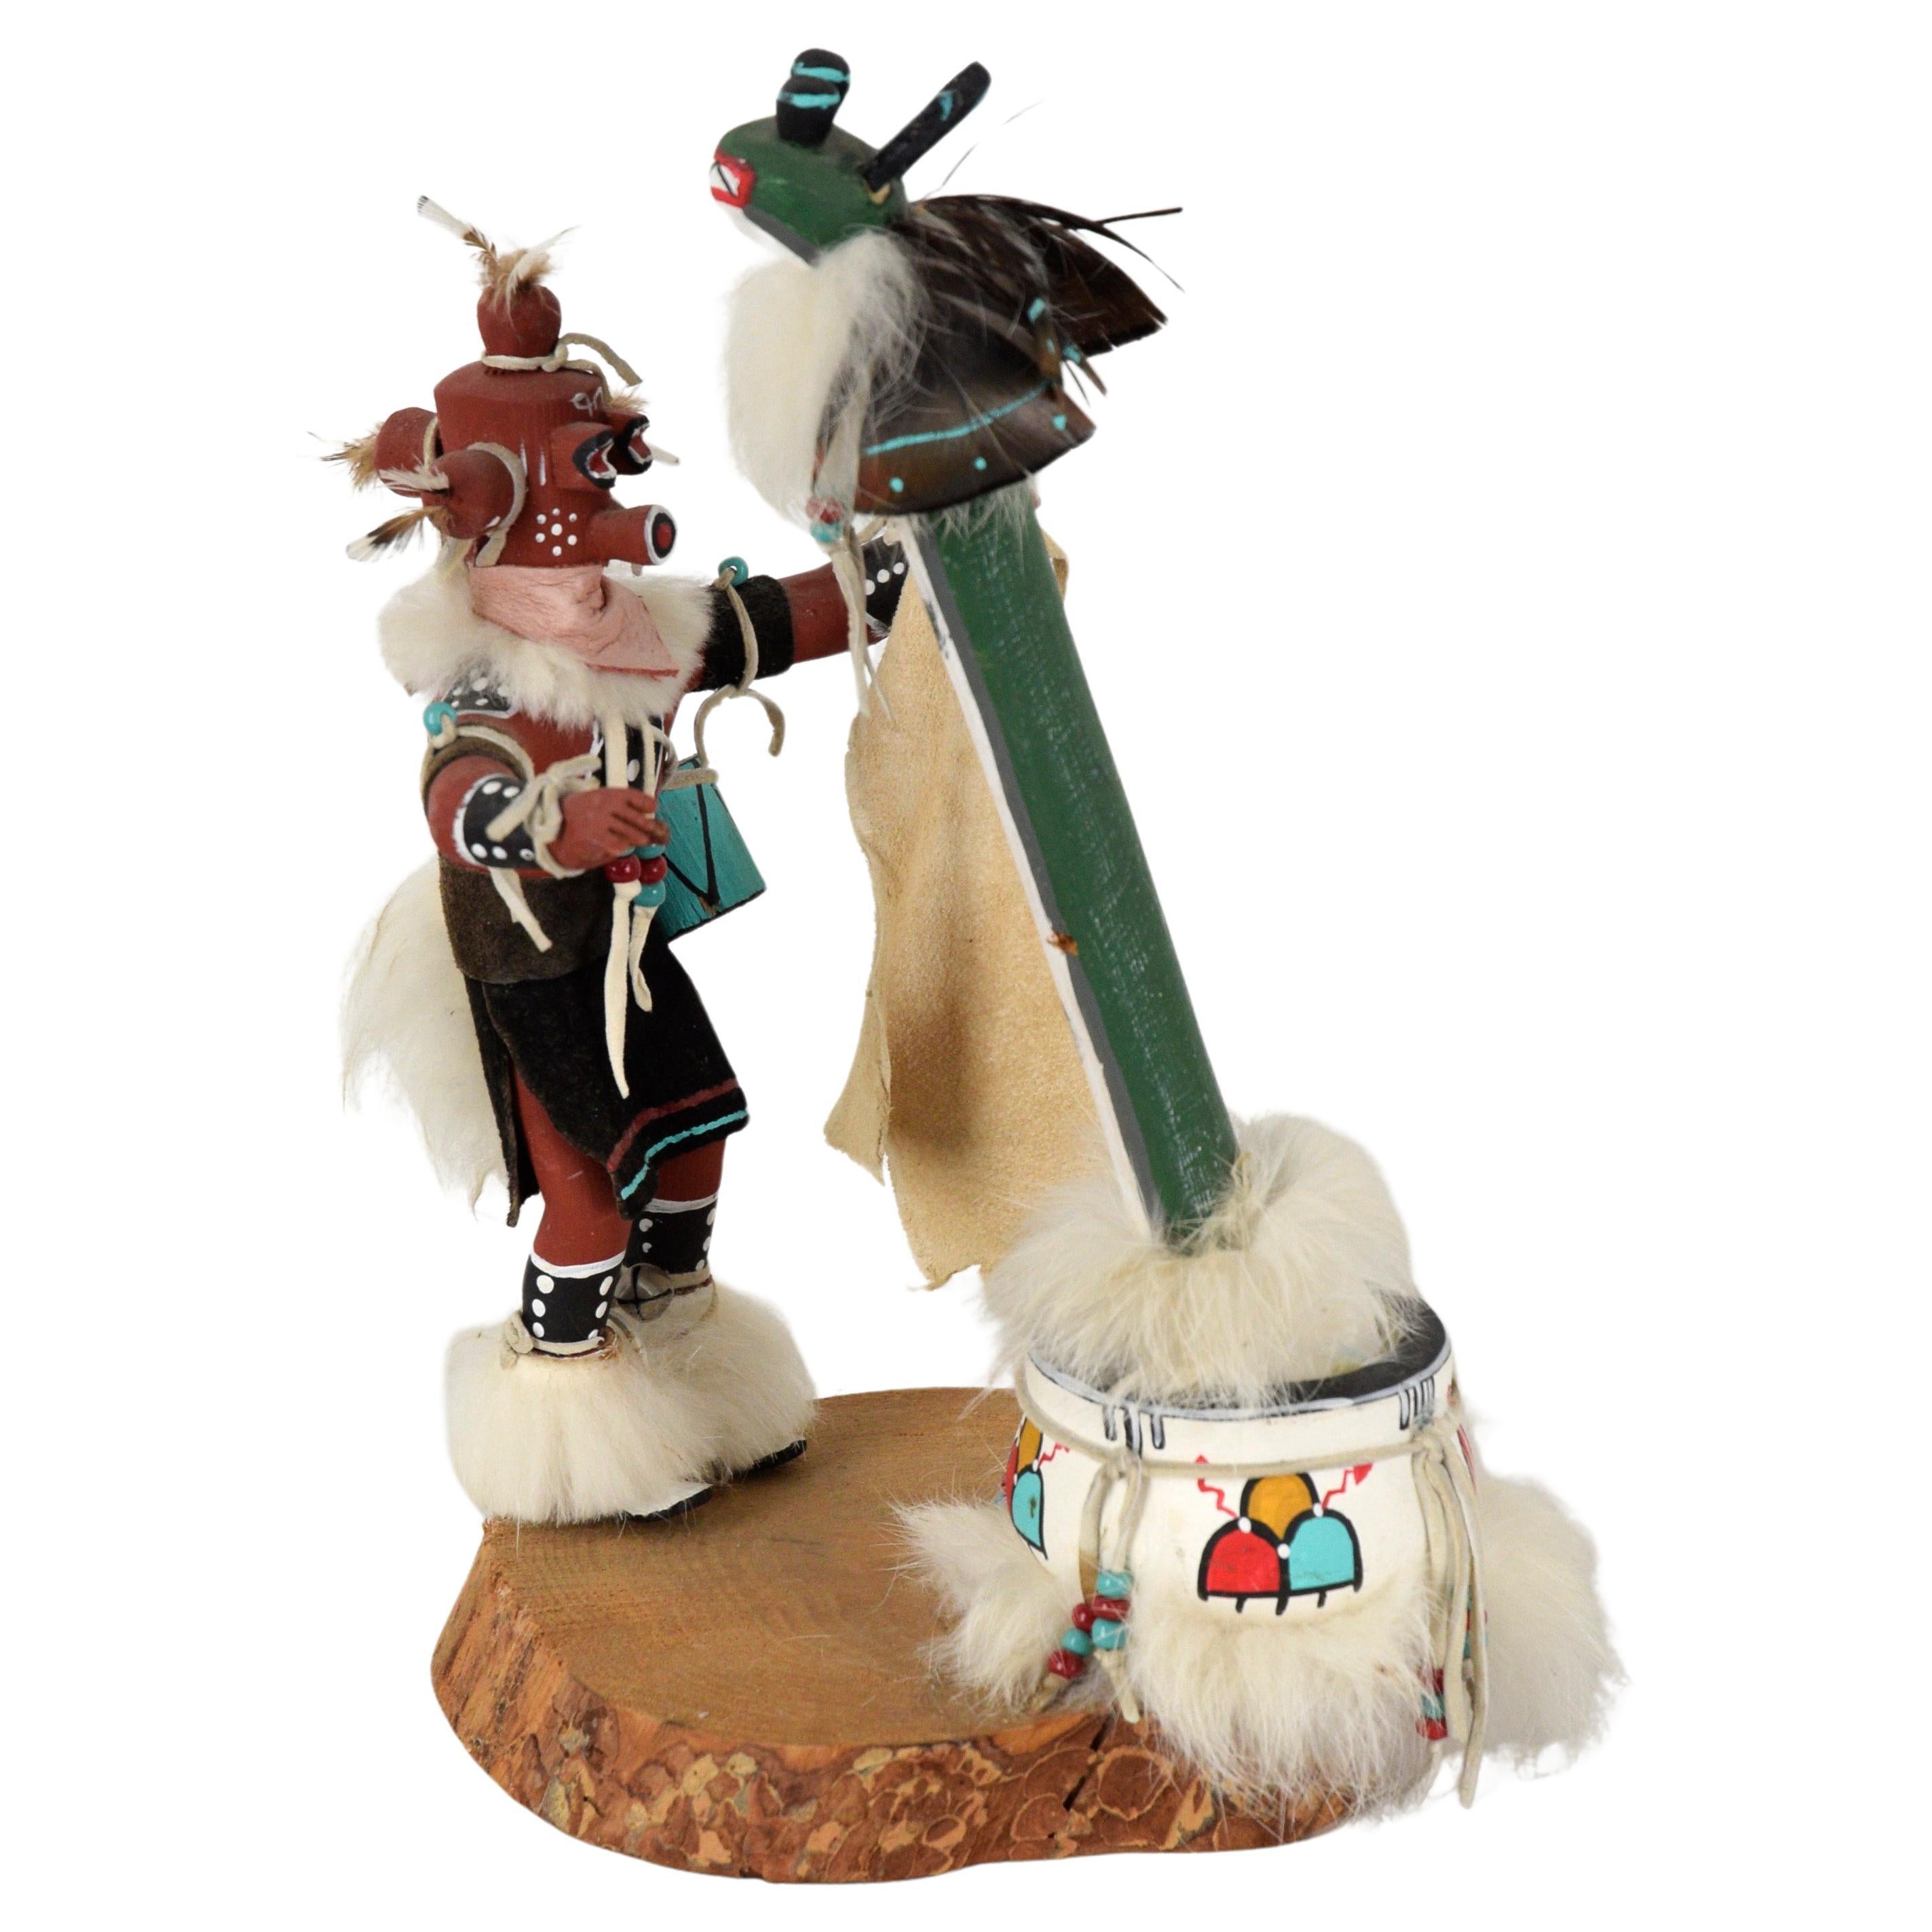 Why are kachina dolls called dolls?